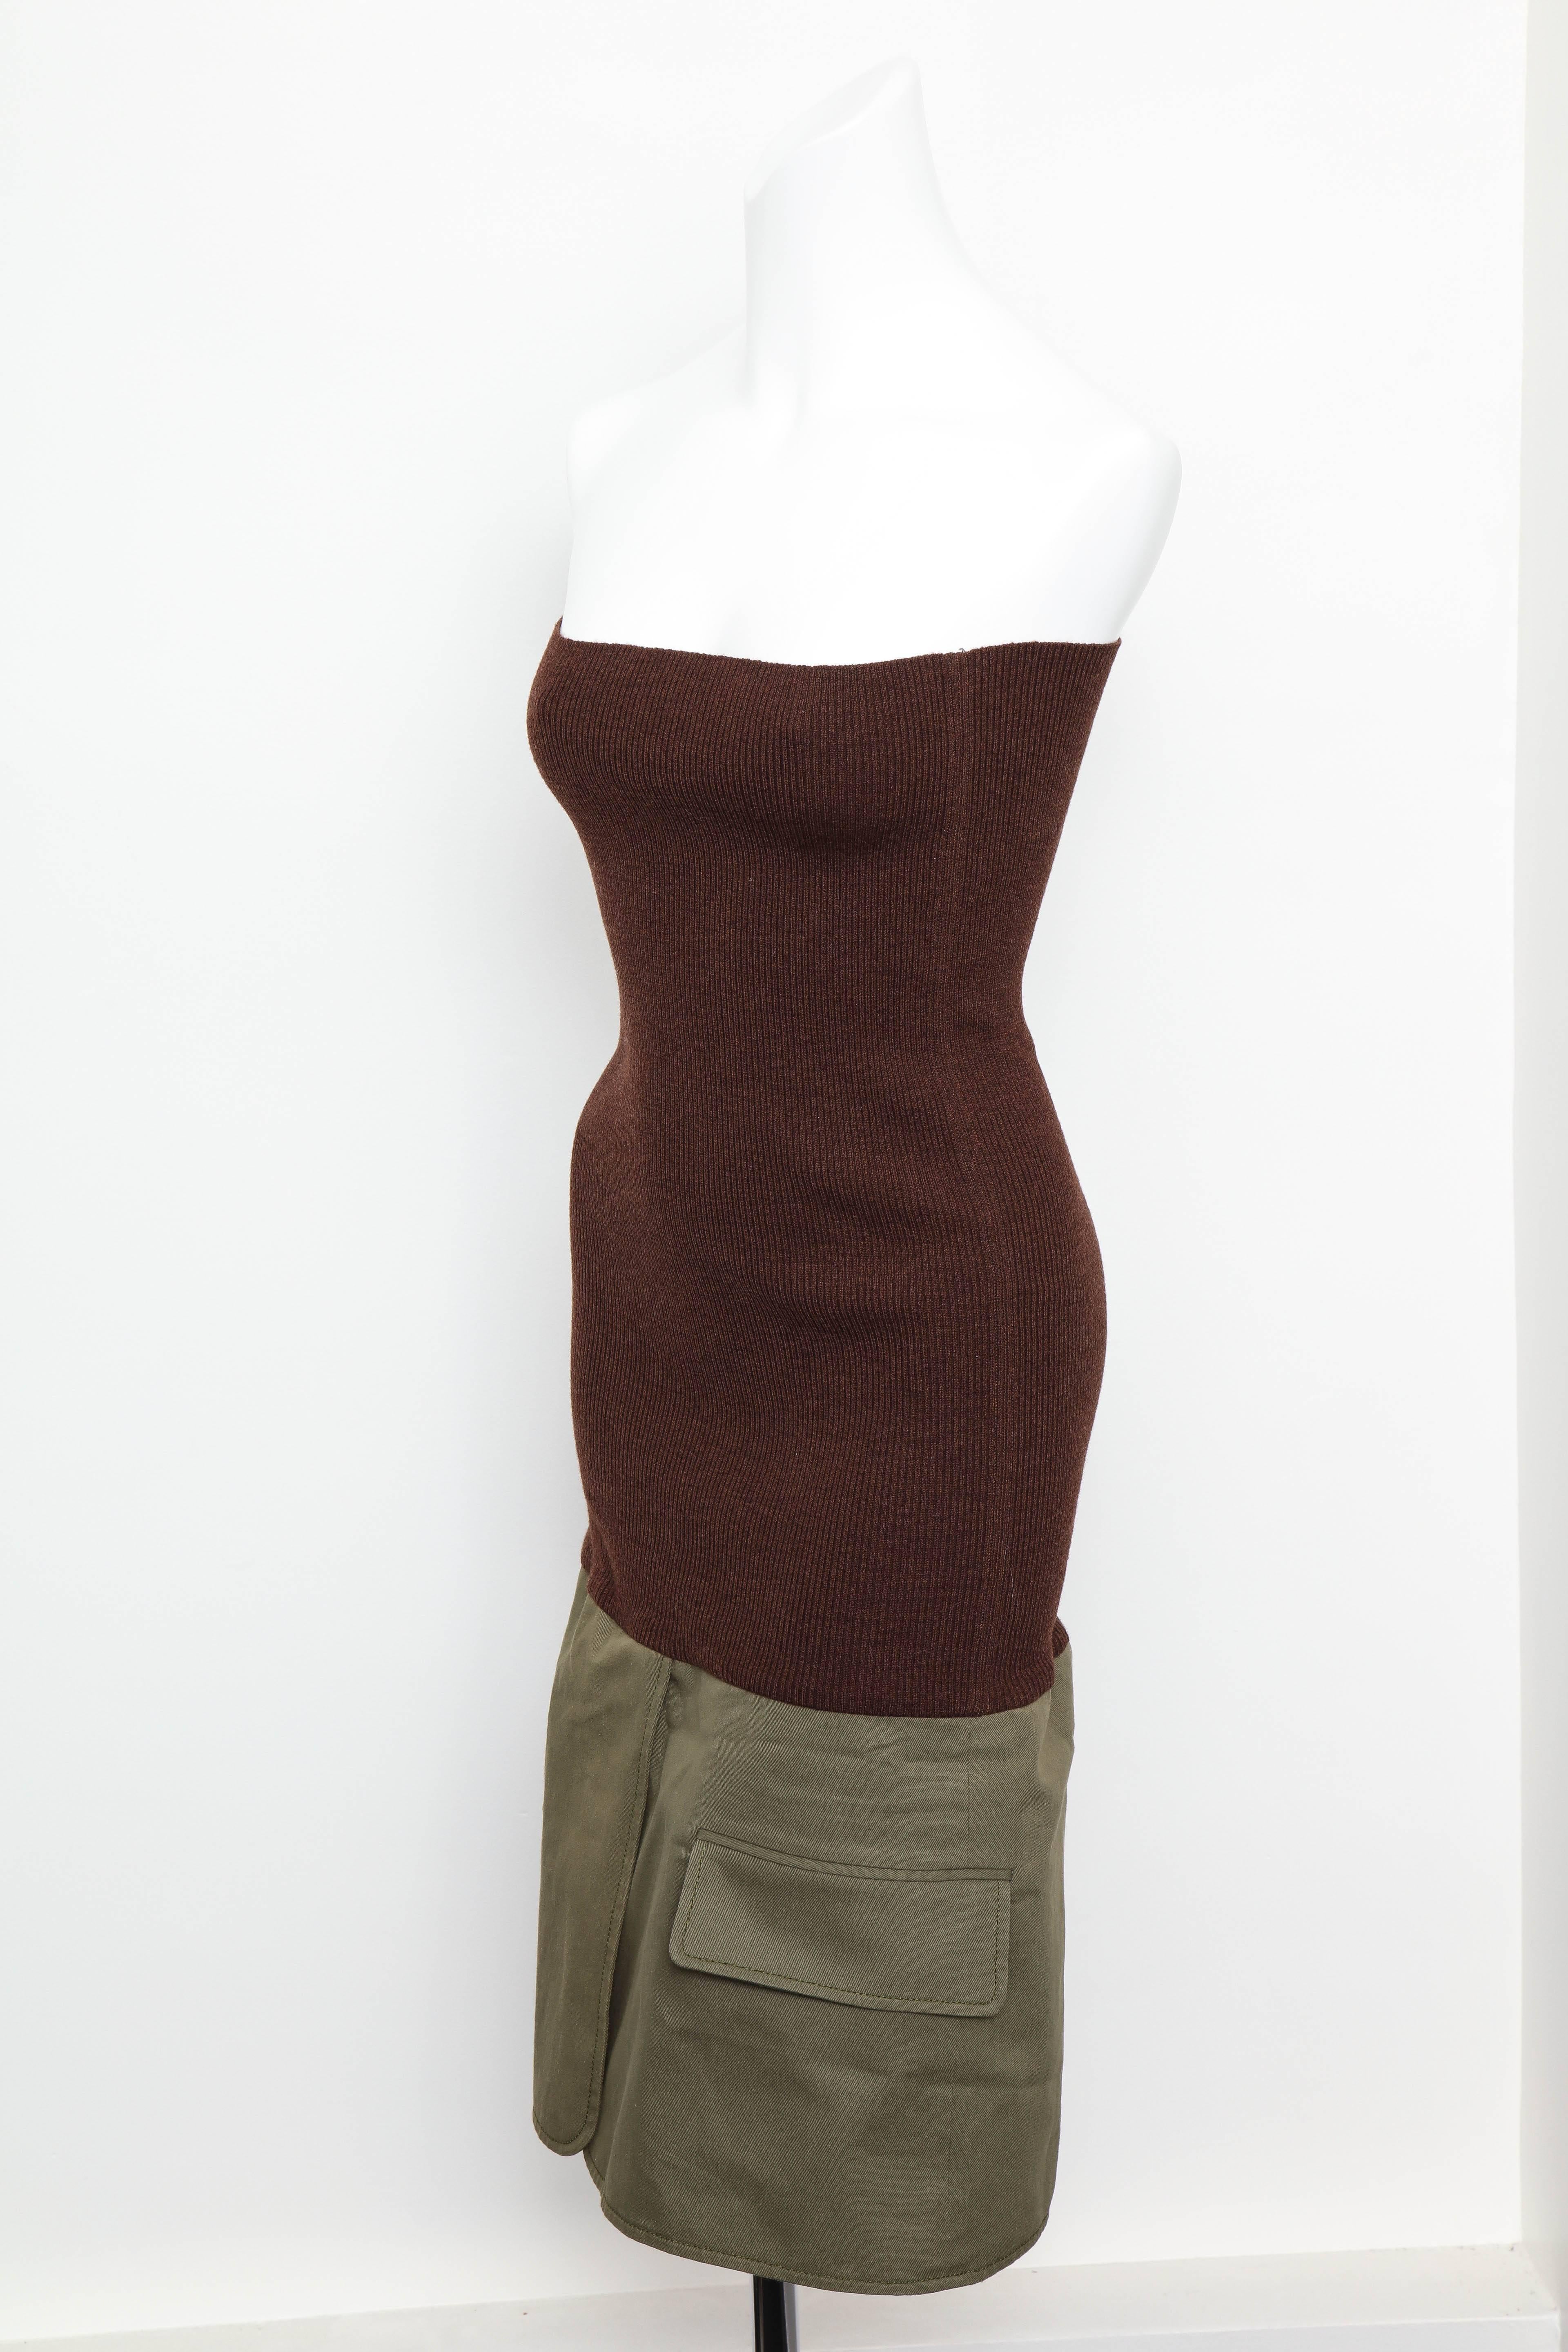 Christian Dior by John Galliano Knit Tube Dress For Sale 2